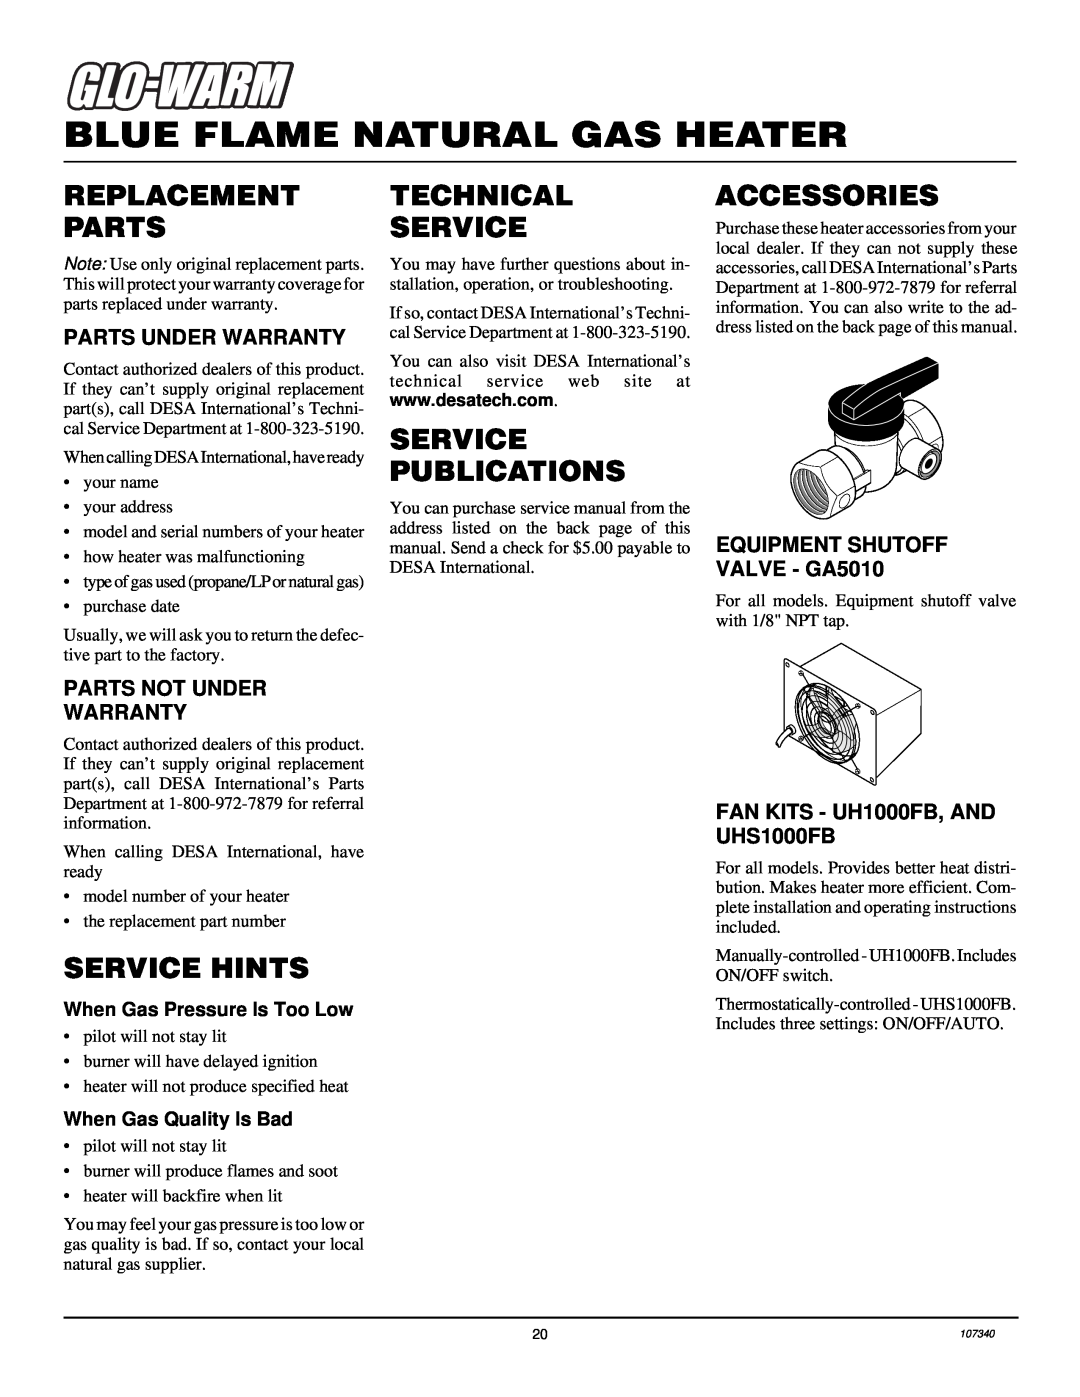 Desa FGHS30NGB installation manual Replacement Parts, Service Hints, Technical Service, Service Publications, Accessories 